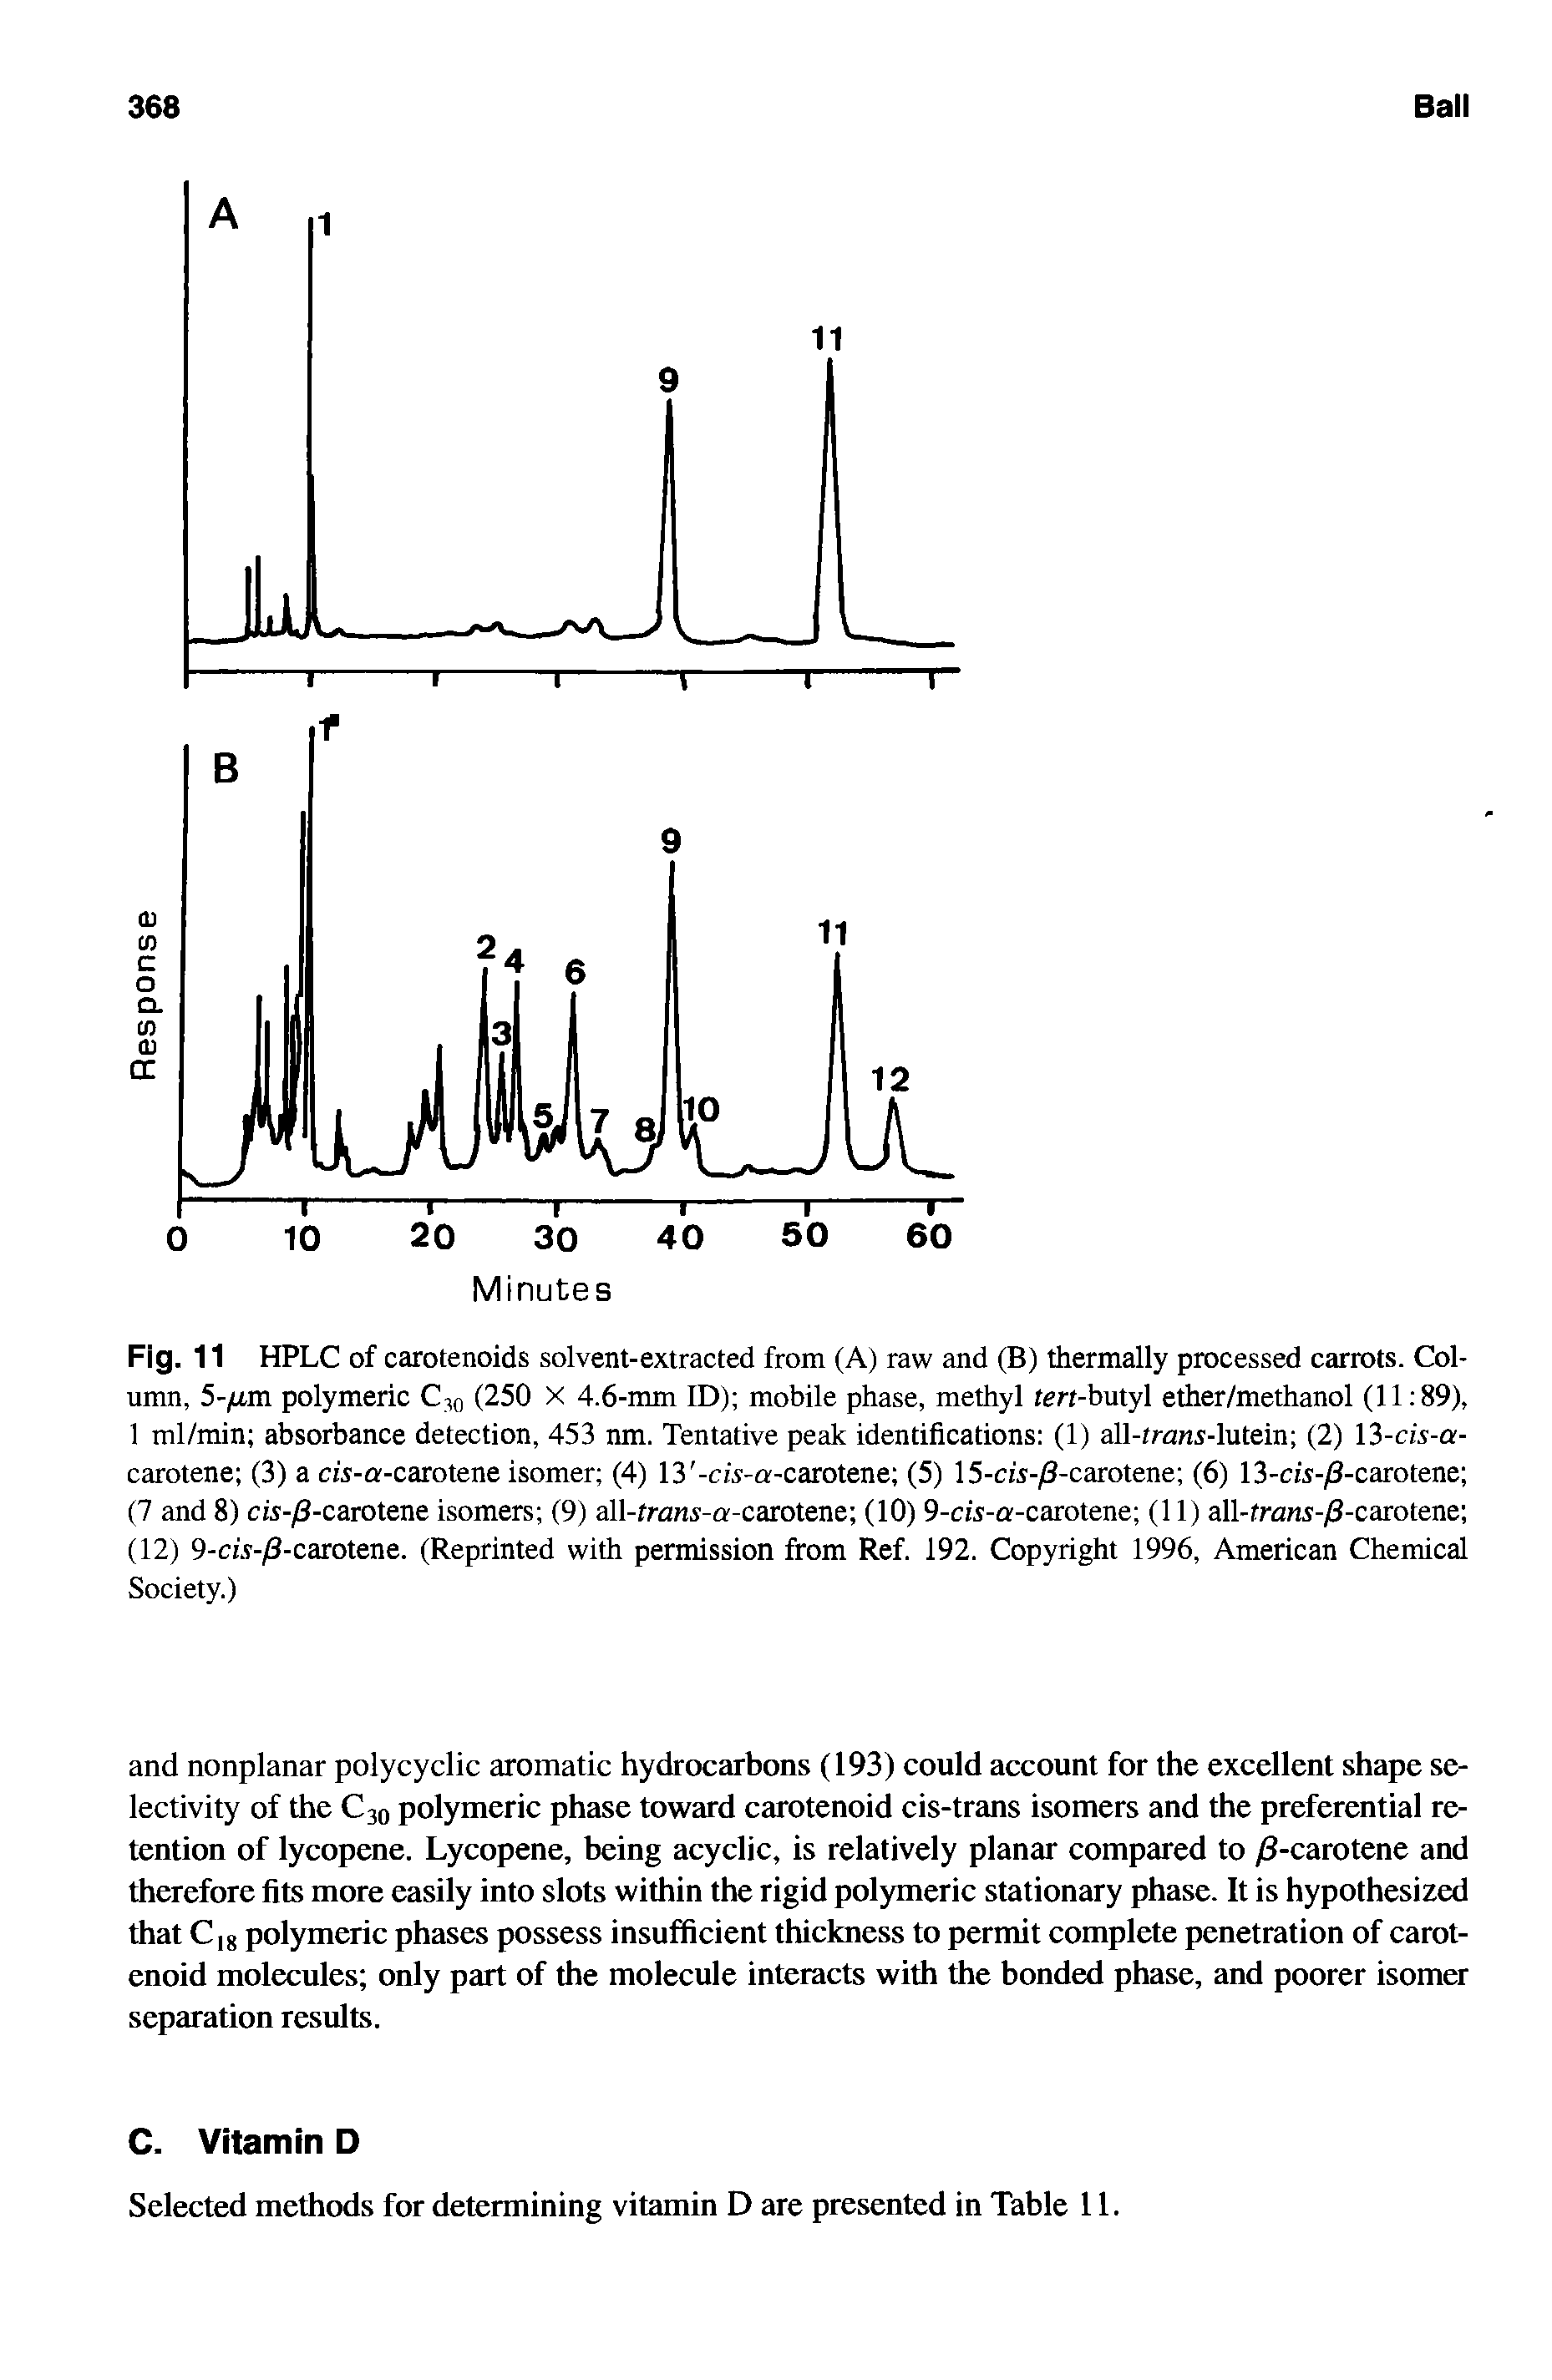 Fig. 11 HPLC of carotenoids solvent-extracted from (A) raw and (B) thermally processed carrots. Column, 5-/um polymeric C1(J (250 X 4.6-mm ID) mobile phase, methyl tert-butyl ether/methanol (11 89), 1 ml/min absorbance detection, 453 nm. Tentative peak identifications (1) all-trans-lutein (2) 13-cis-a-carotene (3) a cis-a-carotene isomer (4) 13 -cA-a-carotene (5) 15-cis-/3-carotene (6) 13-cis-/3-carotene (7 and 8) cis-fi-carotene isomers (9) all-frans-a-carotene (10) 9-cis-a-carotene (11) all-frans-/3-carotene (12) 9-ci. -/3-carotene. (Reprinted with permission from Ref. 192. Copyright 1996, American Chemical Society.)...